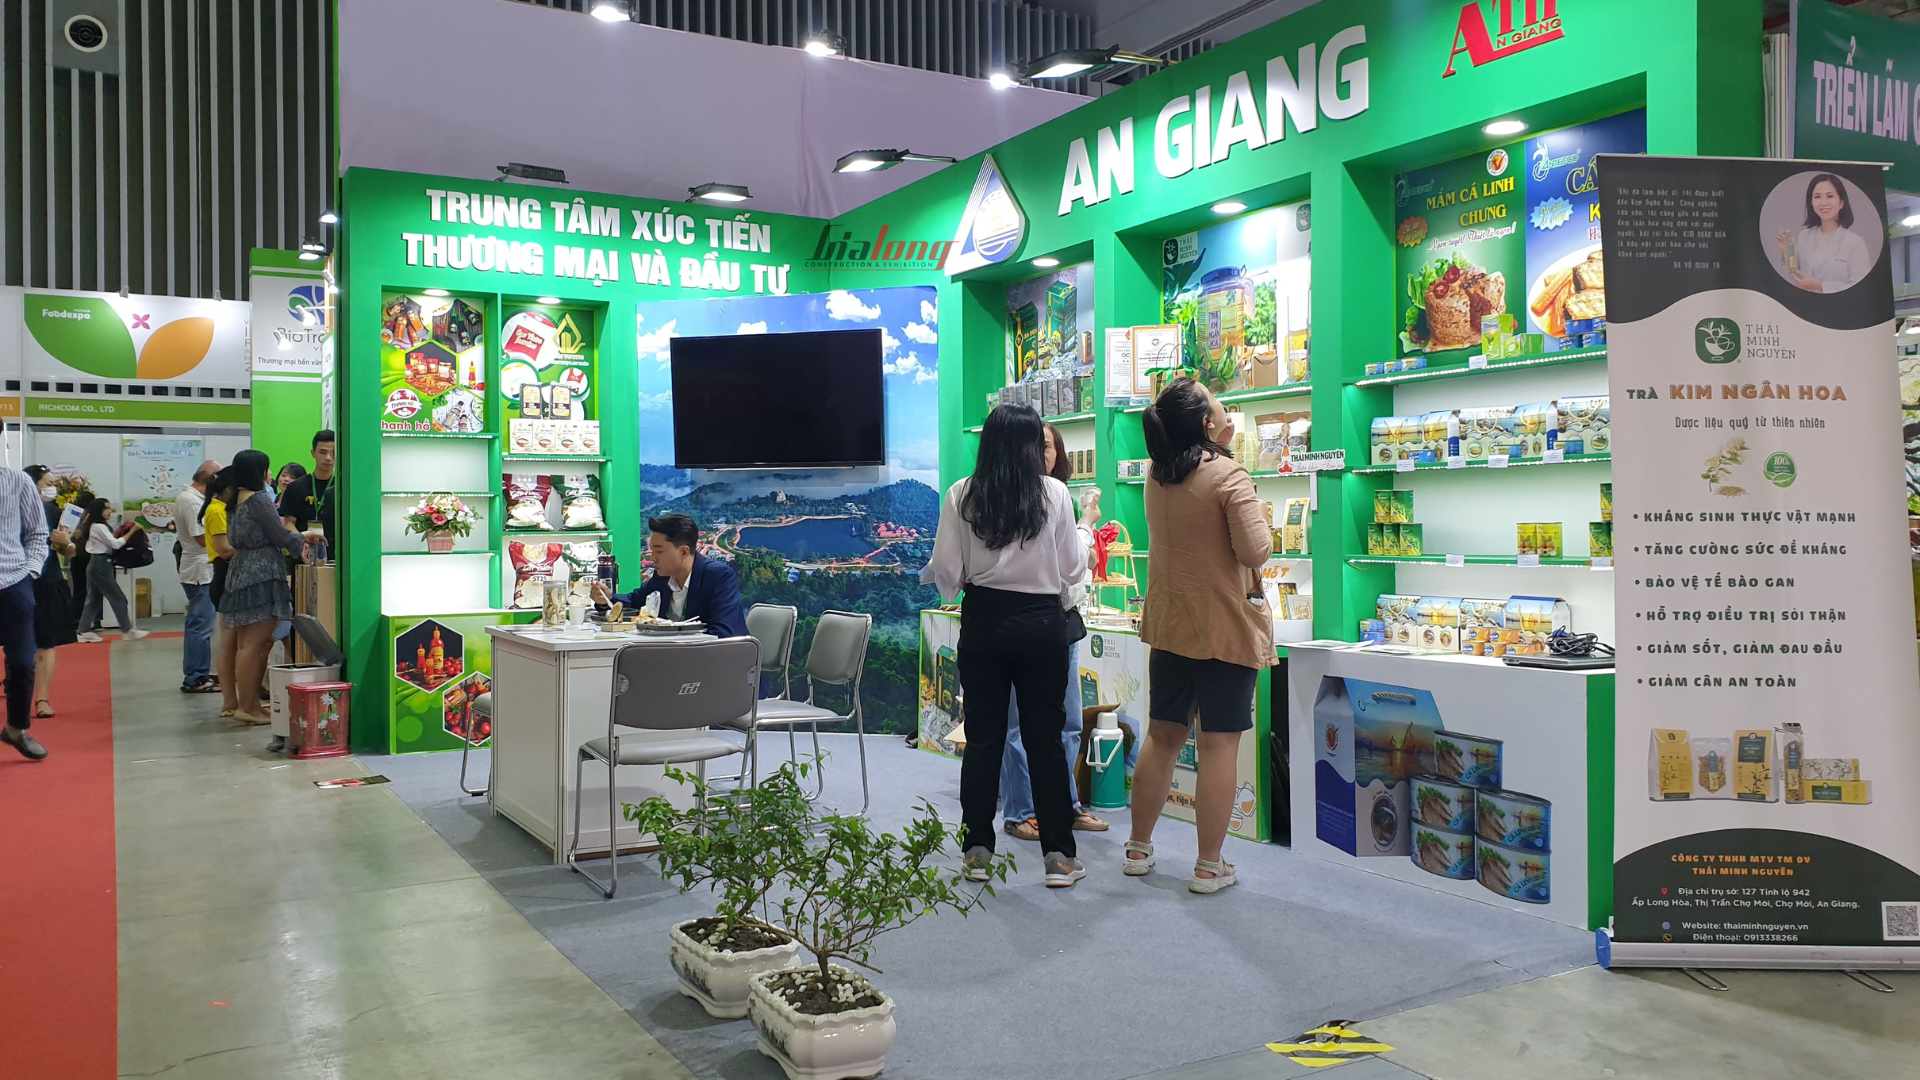 AN GIANG - The booth was constructed and designed by Gia Long